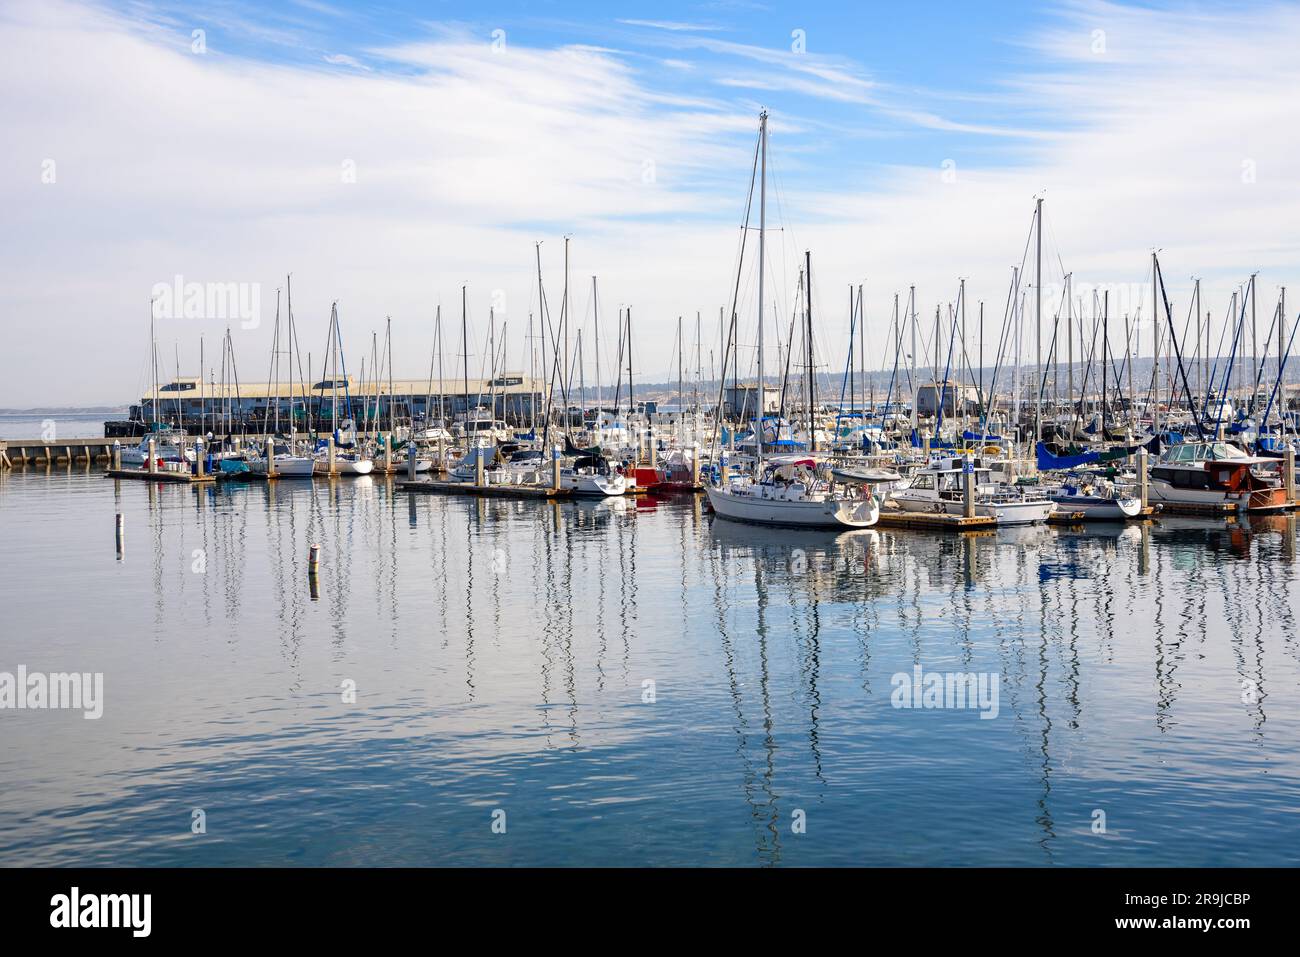 Sailing boats in a marina on a partly cloudy autumn morning Stock Photo